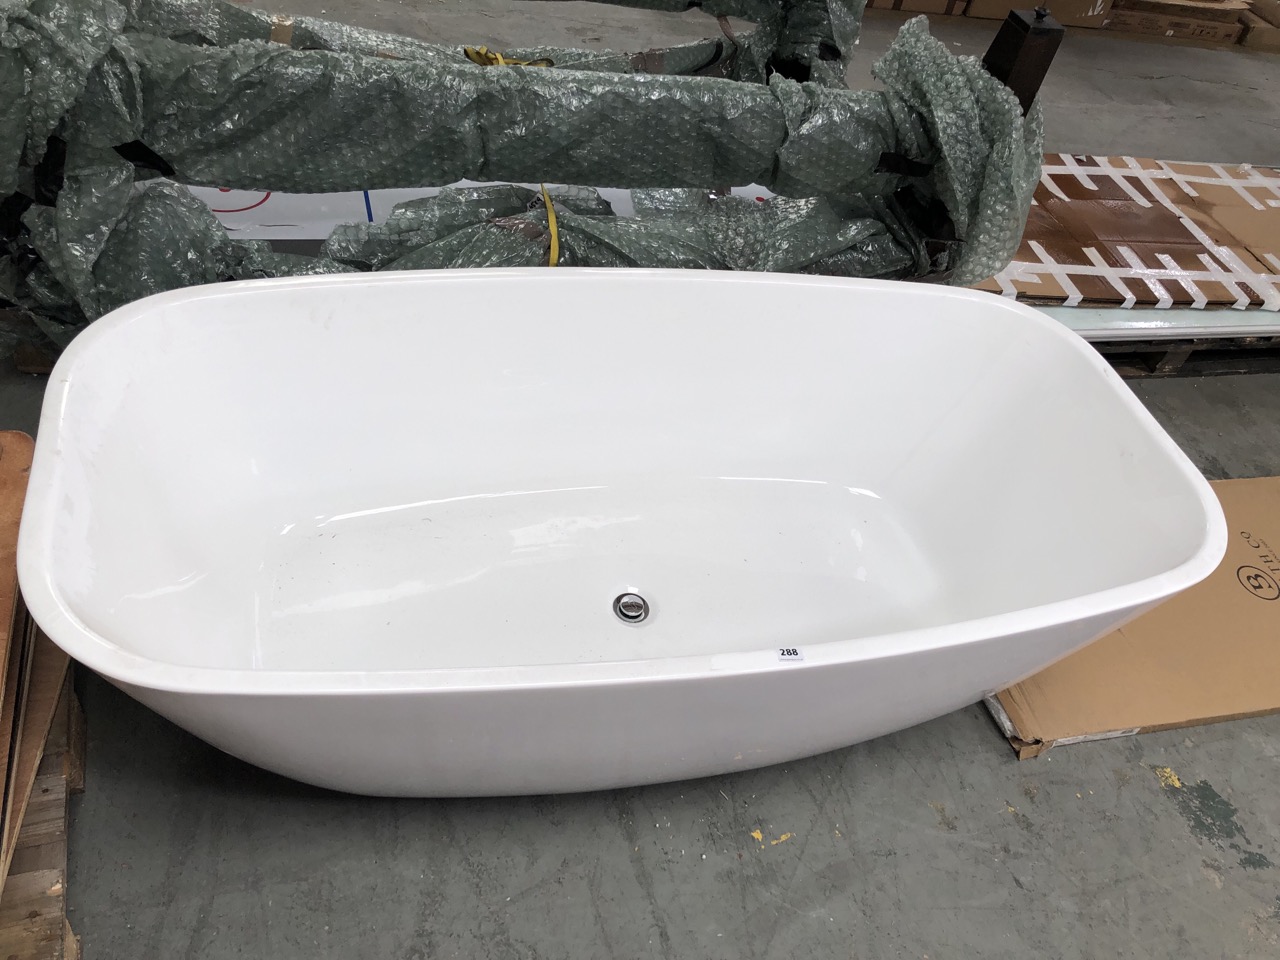 MODE HEATH FREESTANDING BATH APPROX SIZE 1700 X 806MM WHITE RRP- £449 (COLLECTION OR OPTIONAL DELIVERY) (KERBSIDE PALLET DELIVERY)